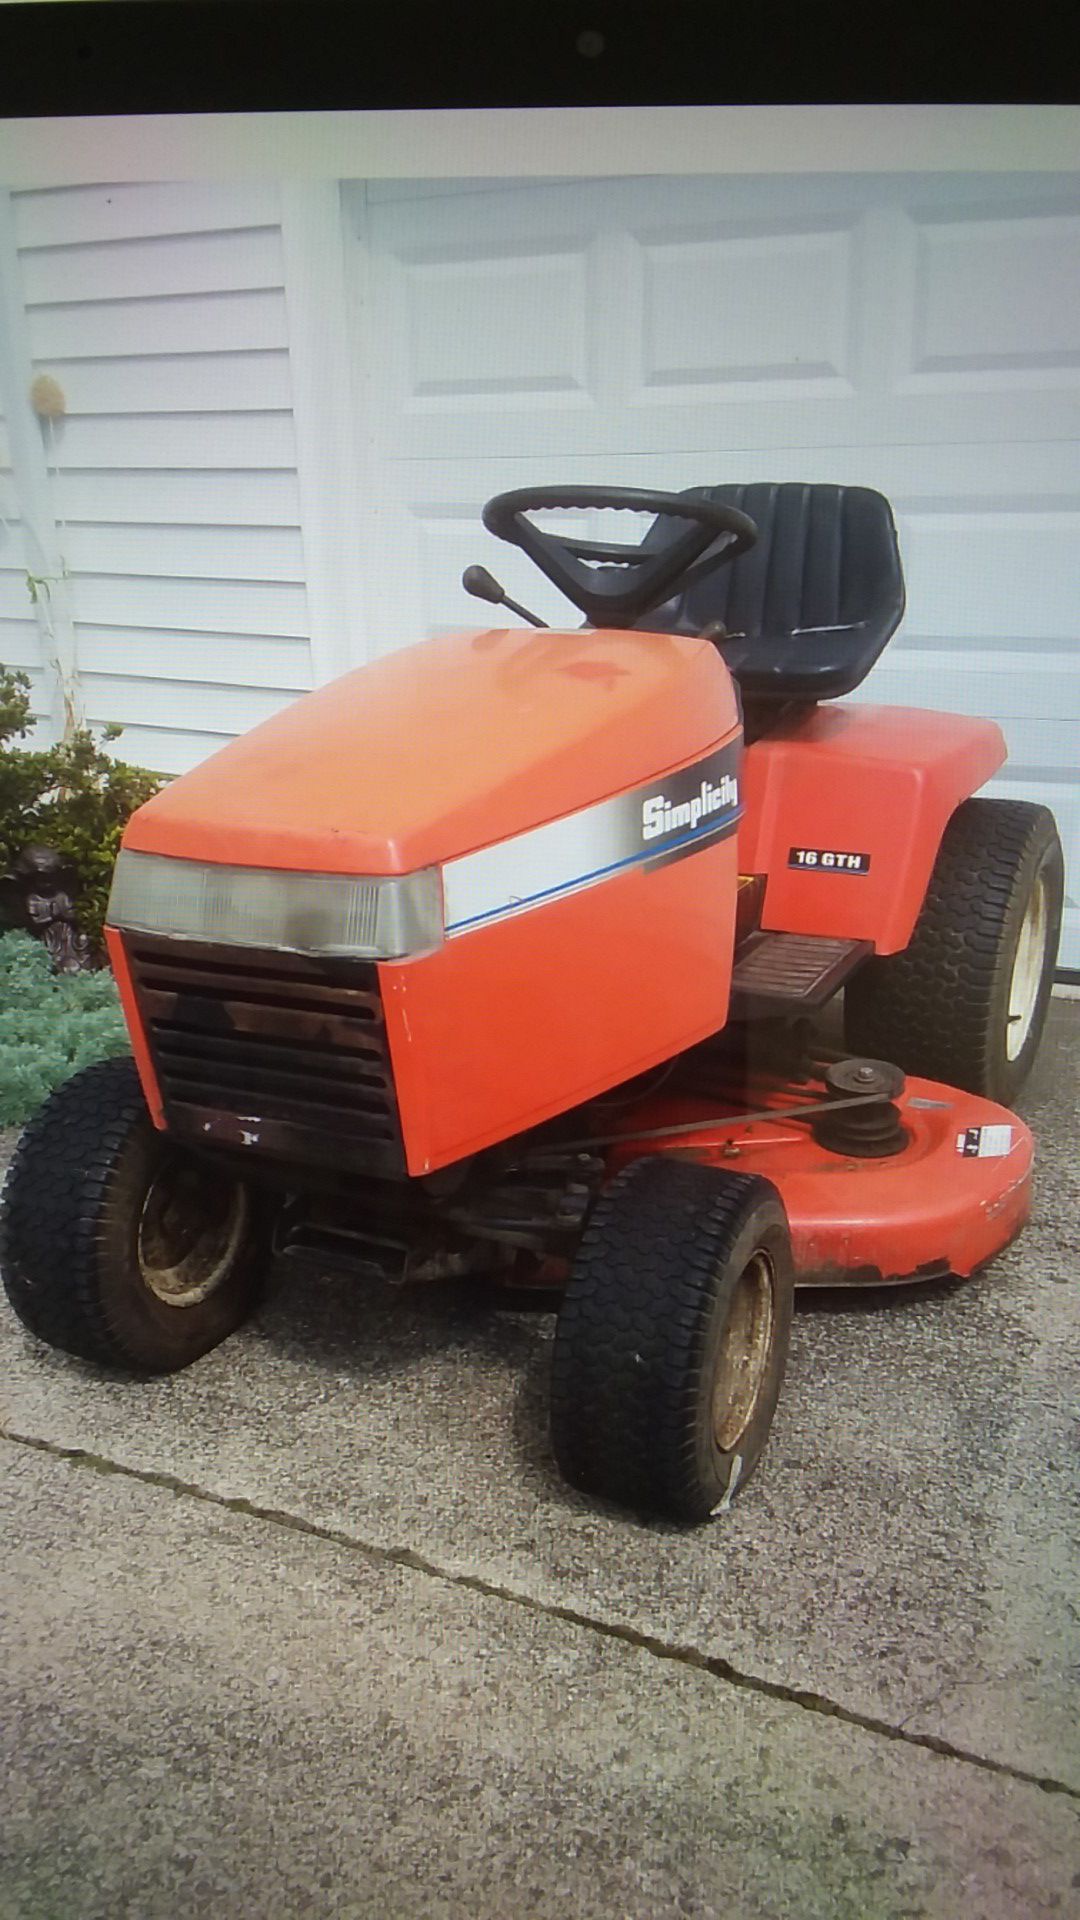 Simplicity Landlord lawn tractor